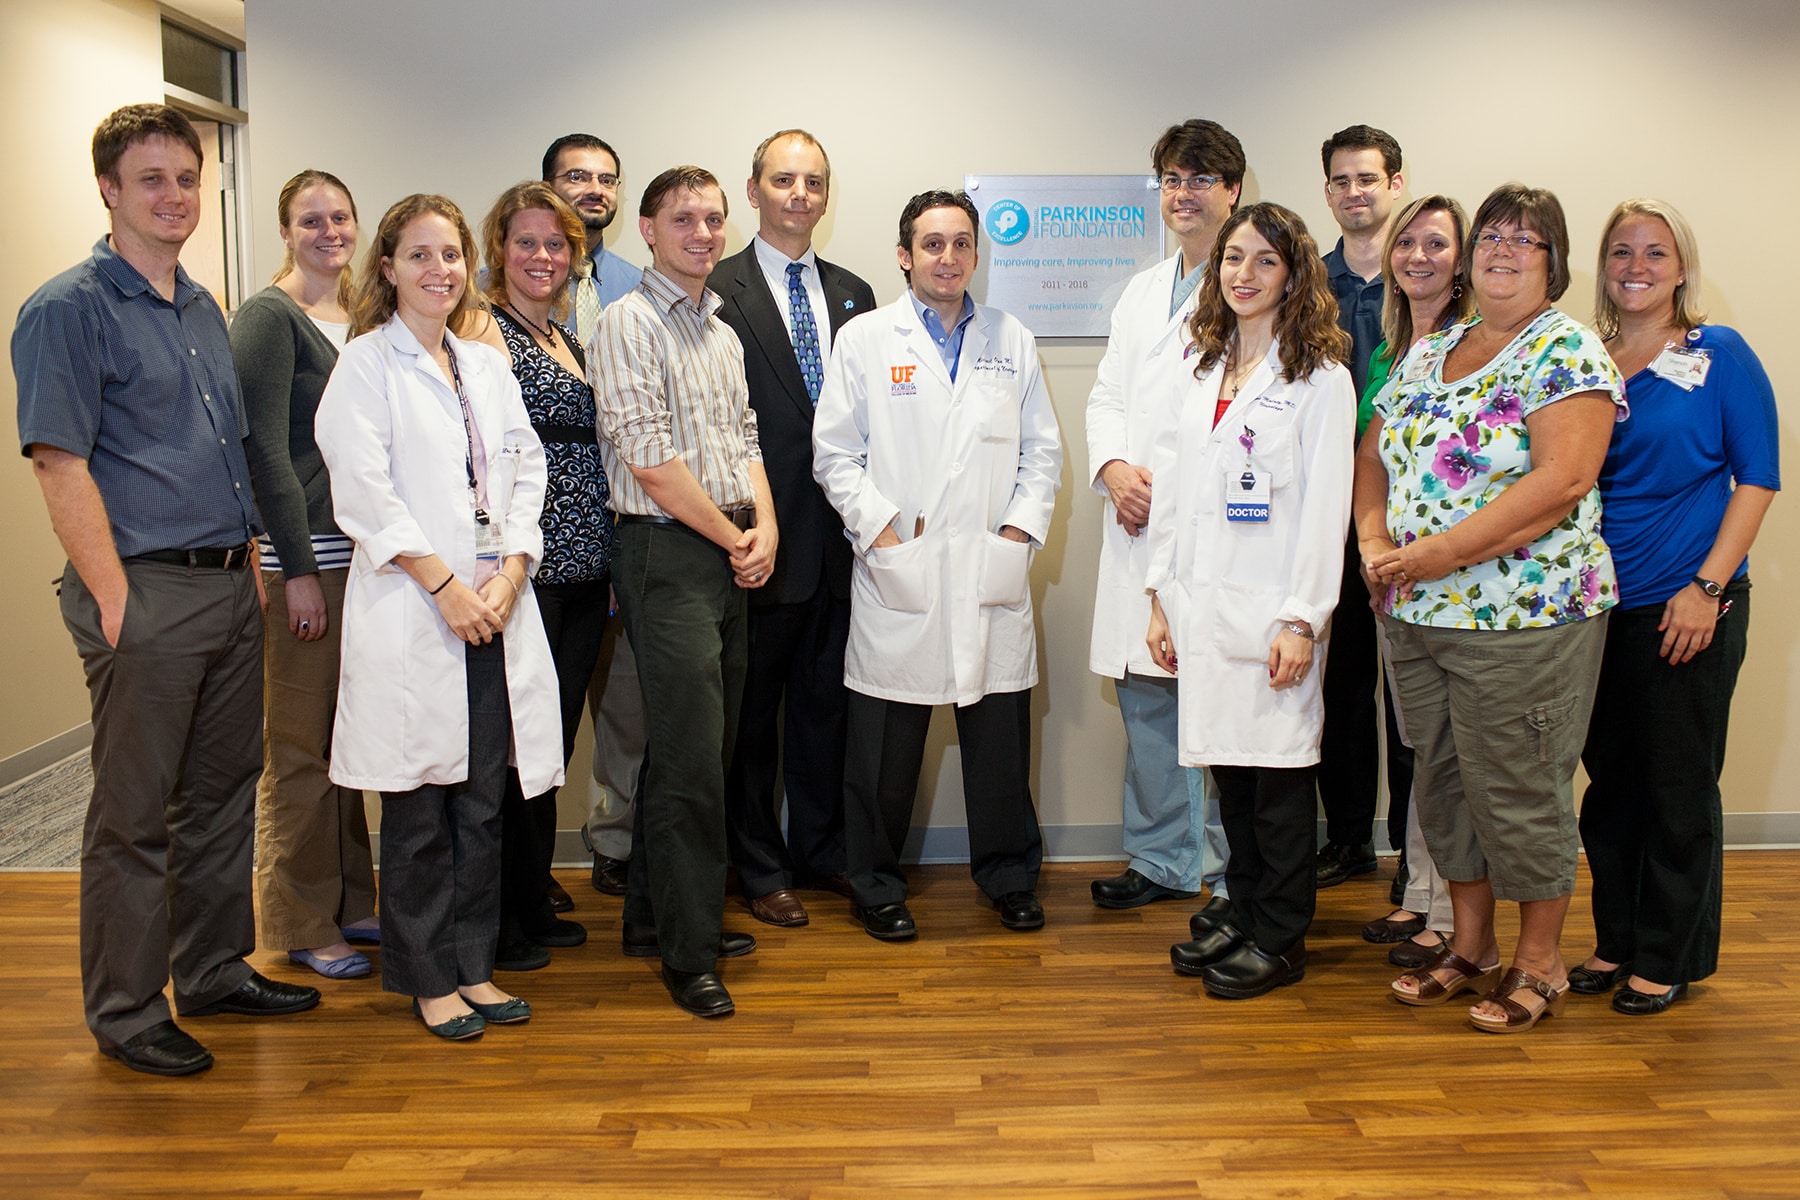 NPF Parkinson Center of Excellence renewed at UF Â» Movement Disorders ...